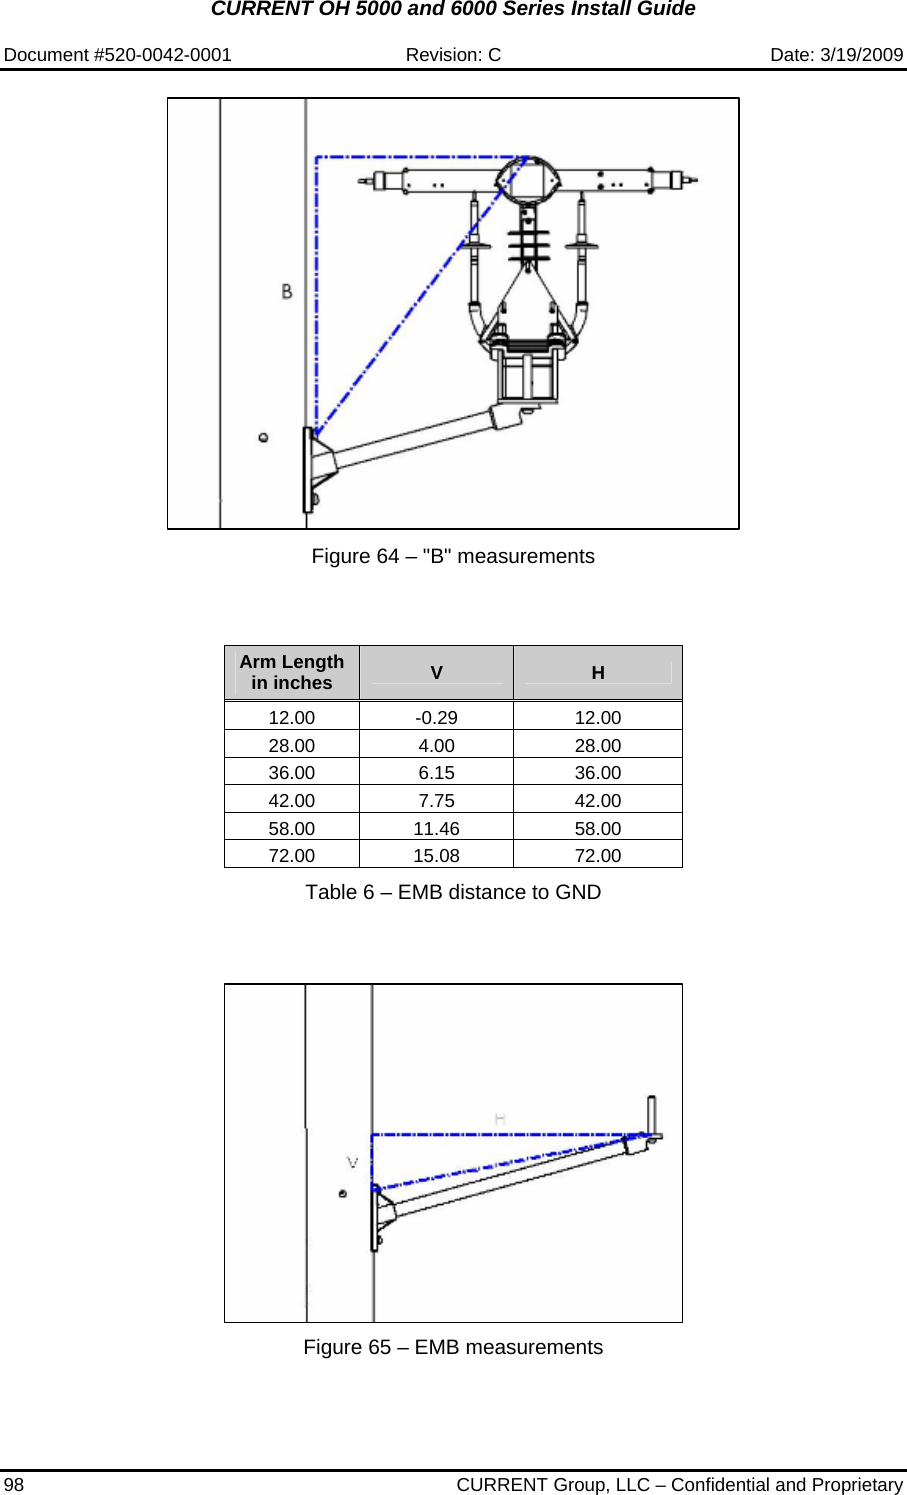 CURRENT OH 5000 and 6000 Series Install Guide  Document #520-0042-0001  Revision: C  Date: 3/19/2009 98  CURRENT Group, LLC – Confidential and Proprietary    Figure 64 – &quot;B&quot; measurements    Arm Length in inches  V  H 12.00 -0.29  12.00 28.00 4.00  28.00 36.00 6.15  36.00 42.00 7.75  42.00 58.00 11.46  58.00 72.00 15.08  72.00  Table 6 – EMB distance to GND      Figure 65 – EMB measurements  